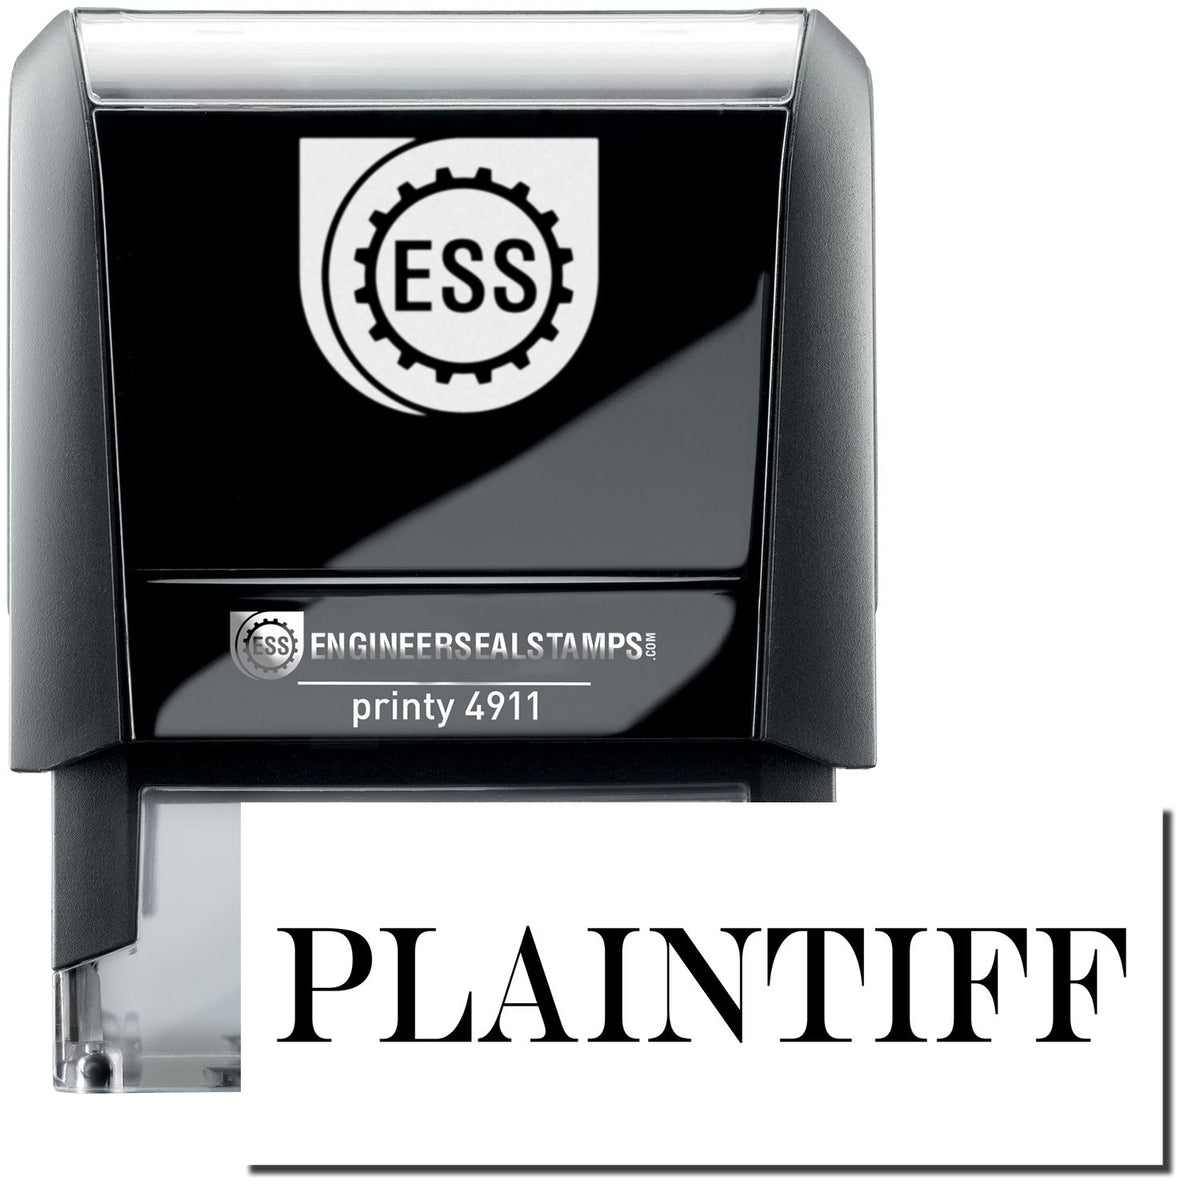 A self-inking stamp with a stamped image showing how the text &quot;PLAINTIFF&quot; is displayed after stamping.